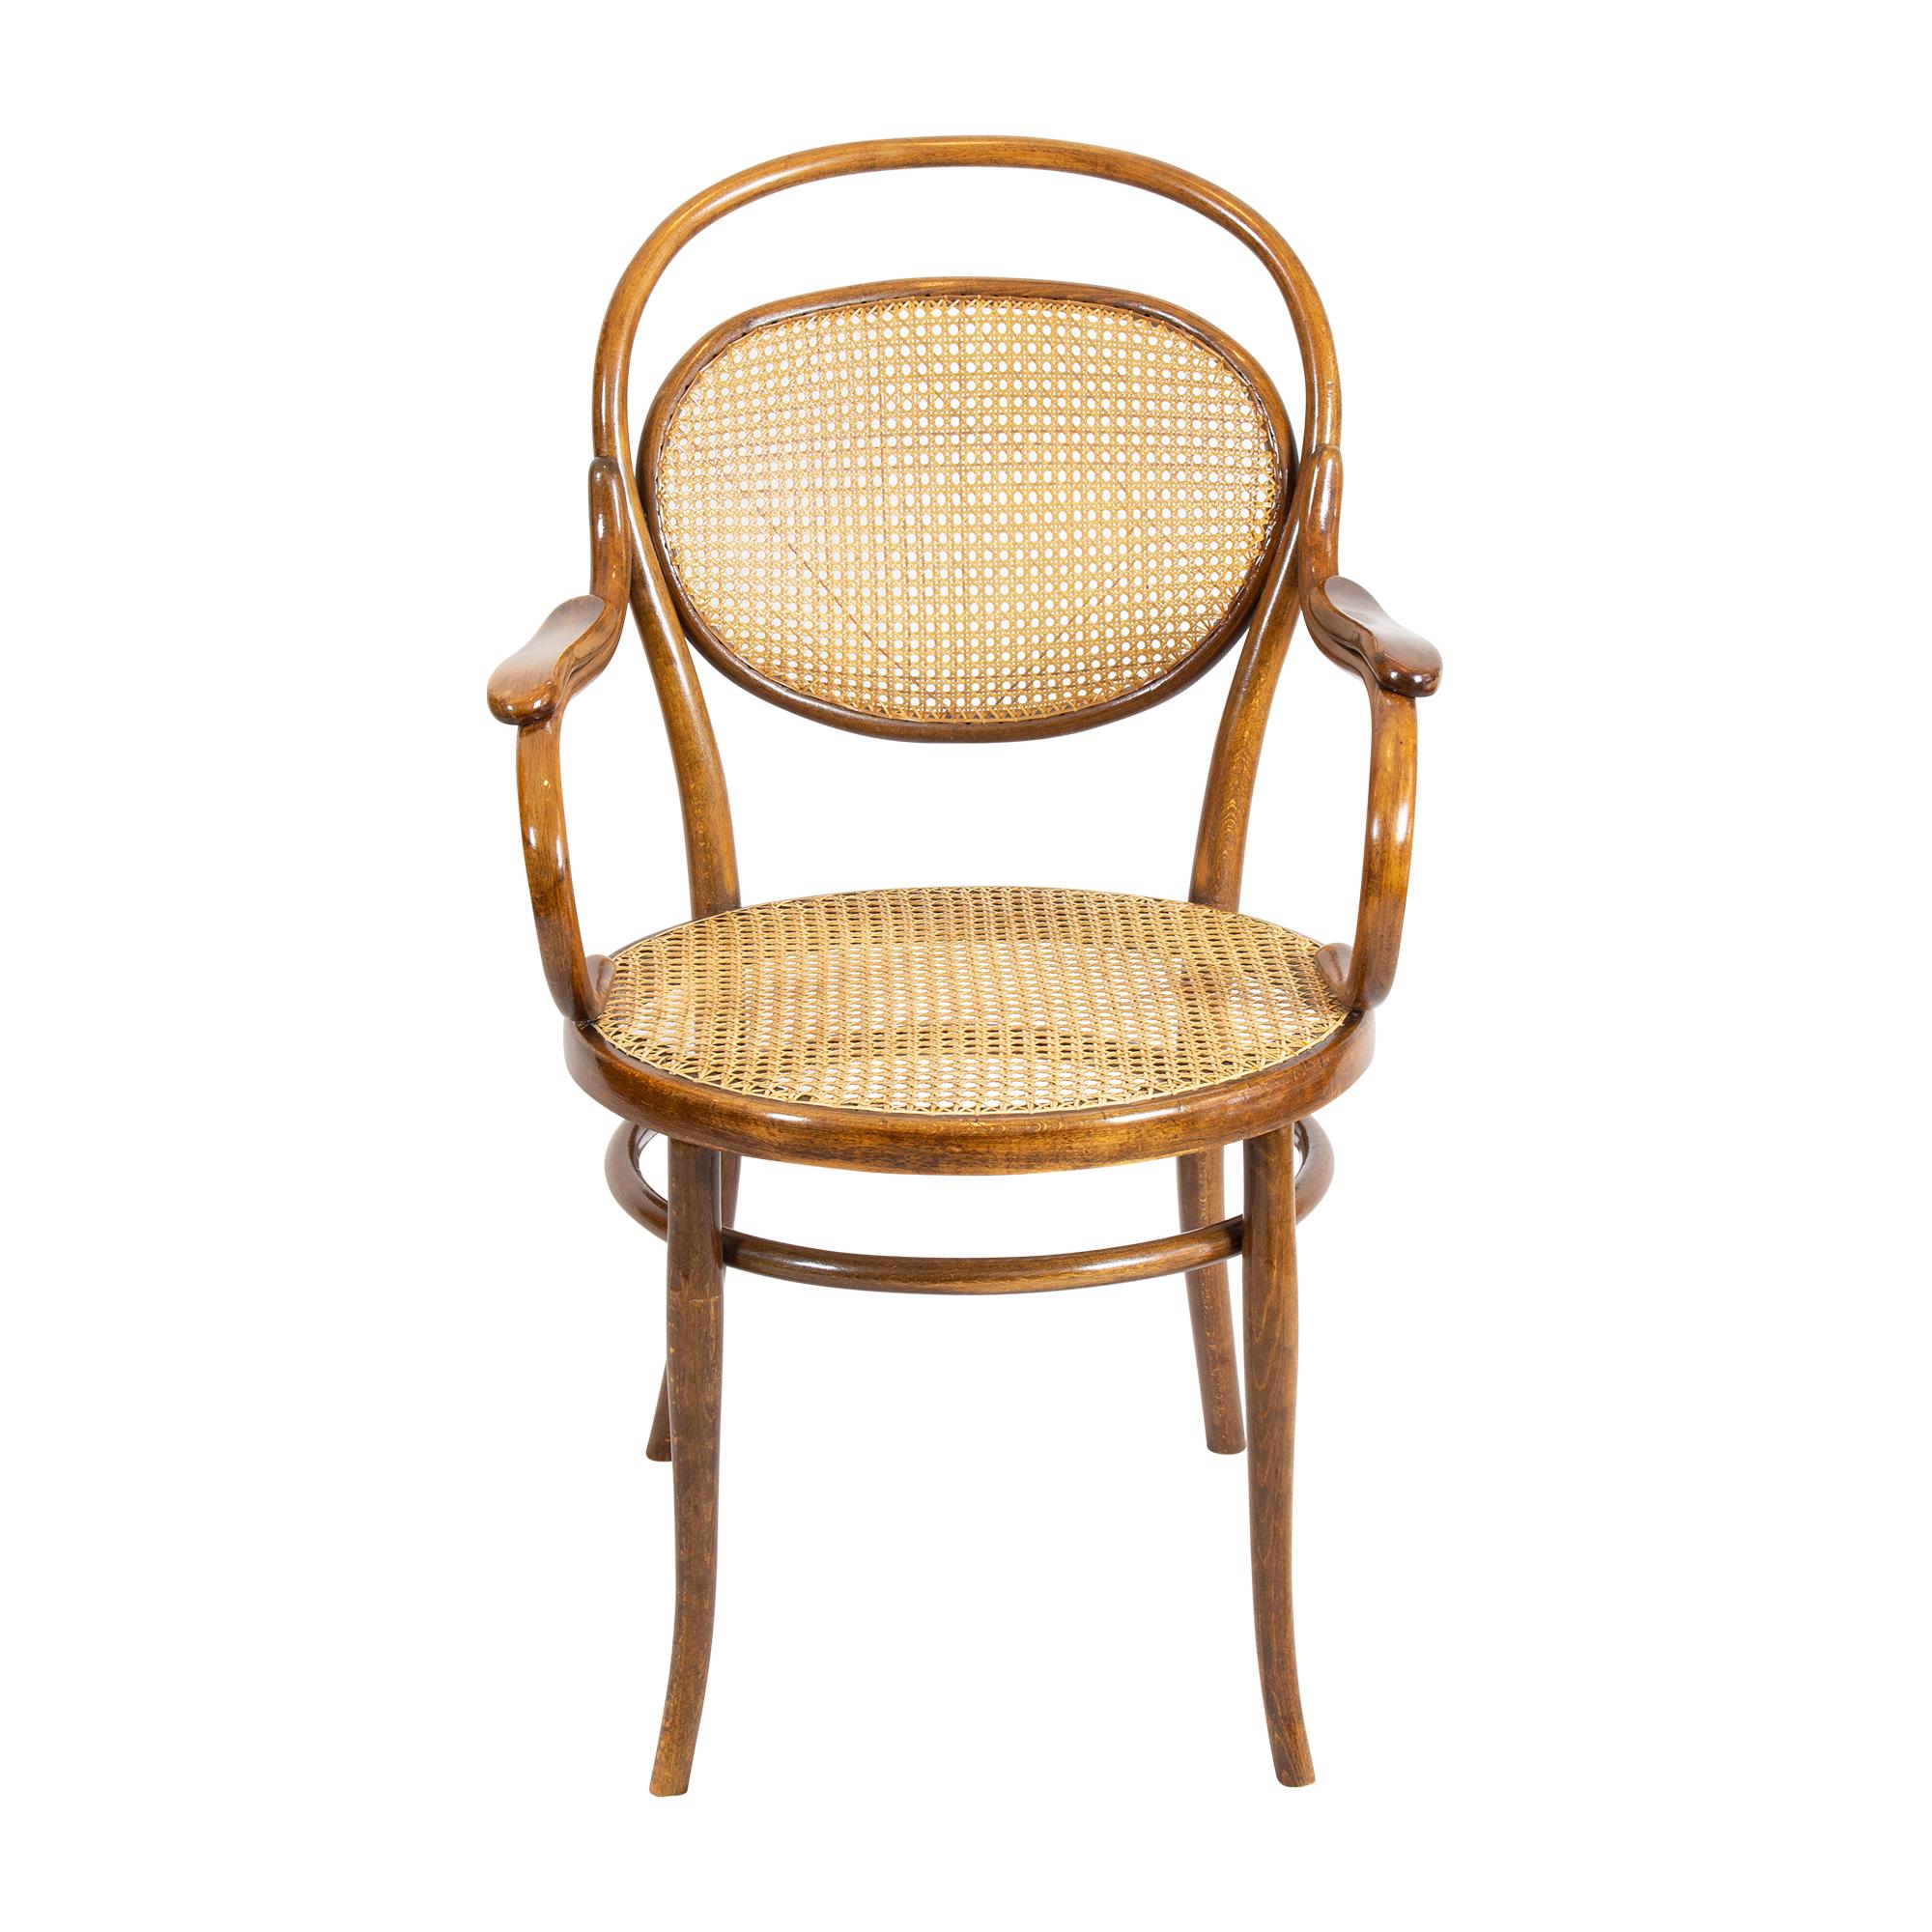 Art Nouveau armchair was built by Thonet company from bentwood. The seat as well as the backrest are made with a so-called Viennese weave. The chair is in a good restored condition.